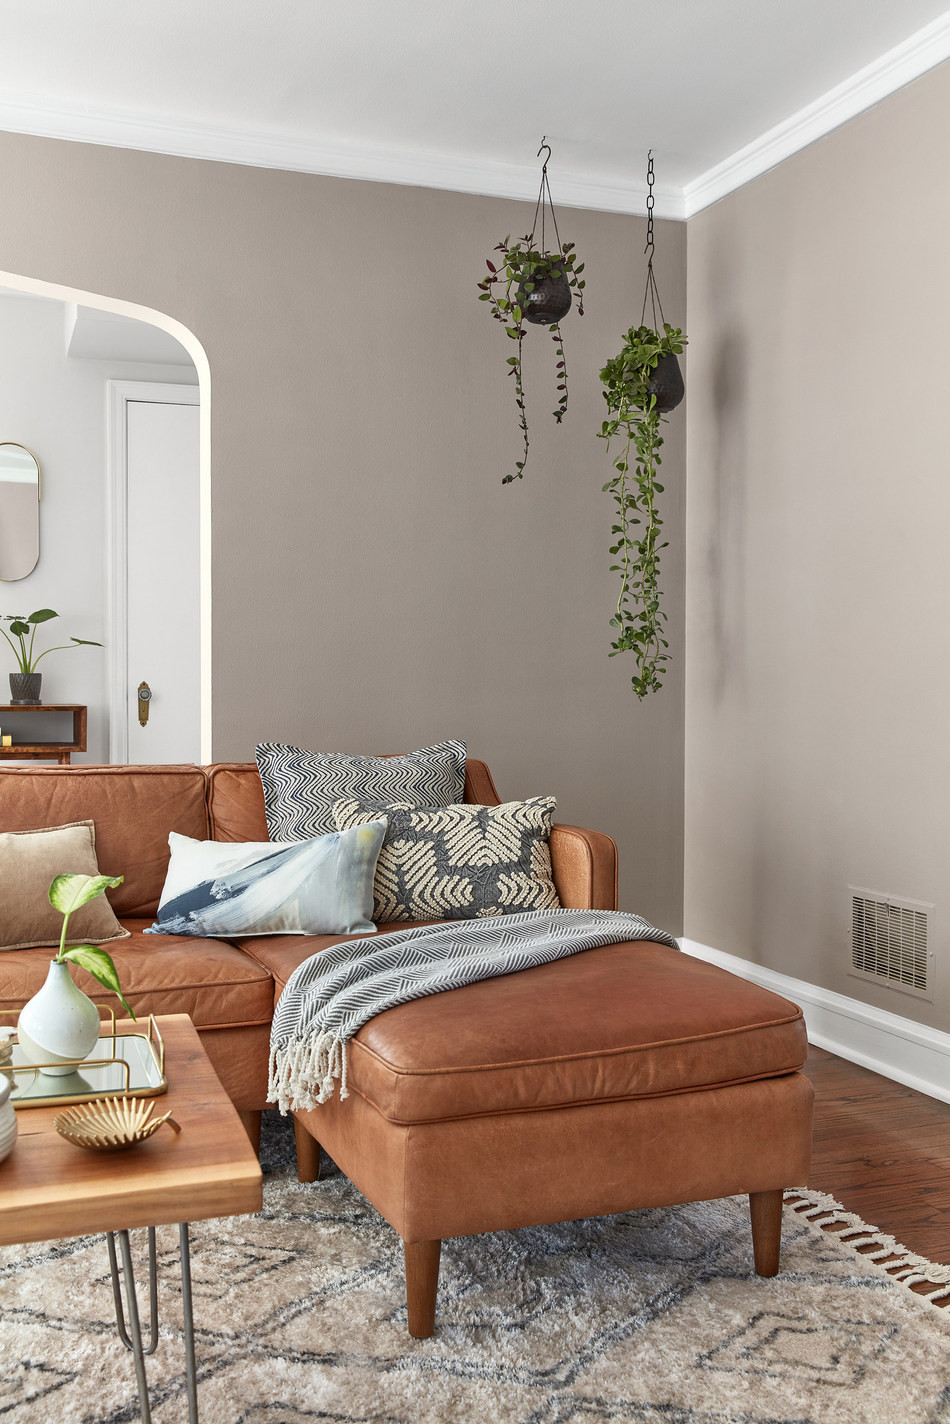 2020 Living Room Colors
 Valspar Announces 2020 Colors of the Year Inspired by Nature